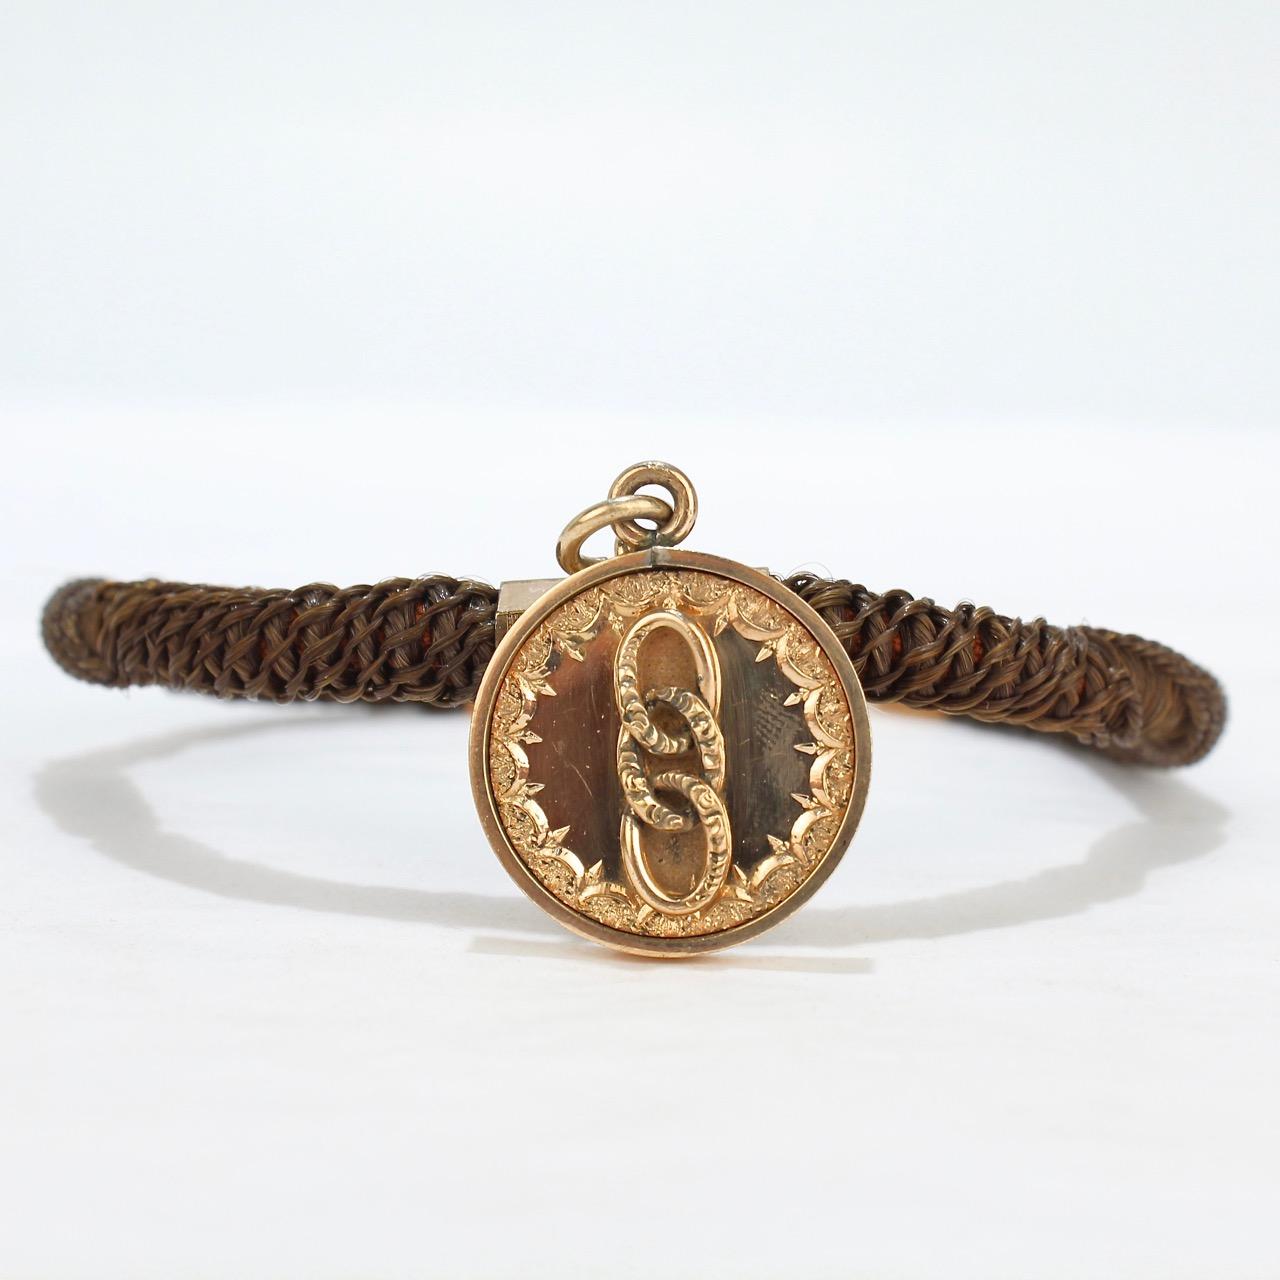 Women's or Men's Antique Woven Hair and Gold-Filled Memorial Watch Chain with Odd Fellows Pendant